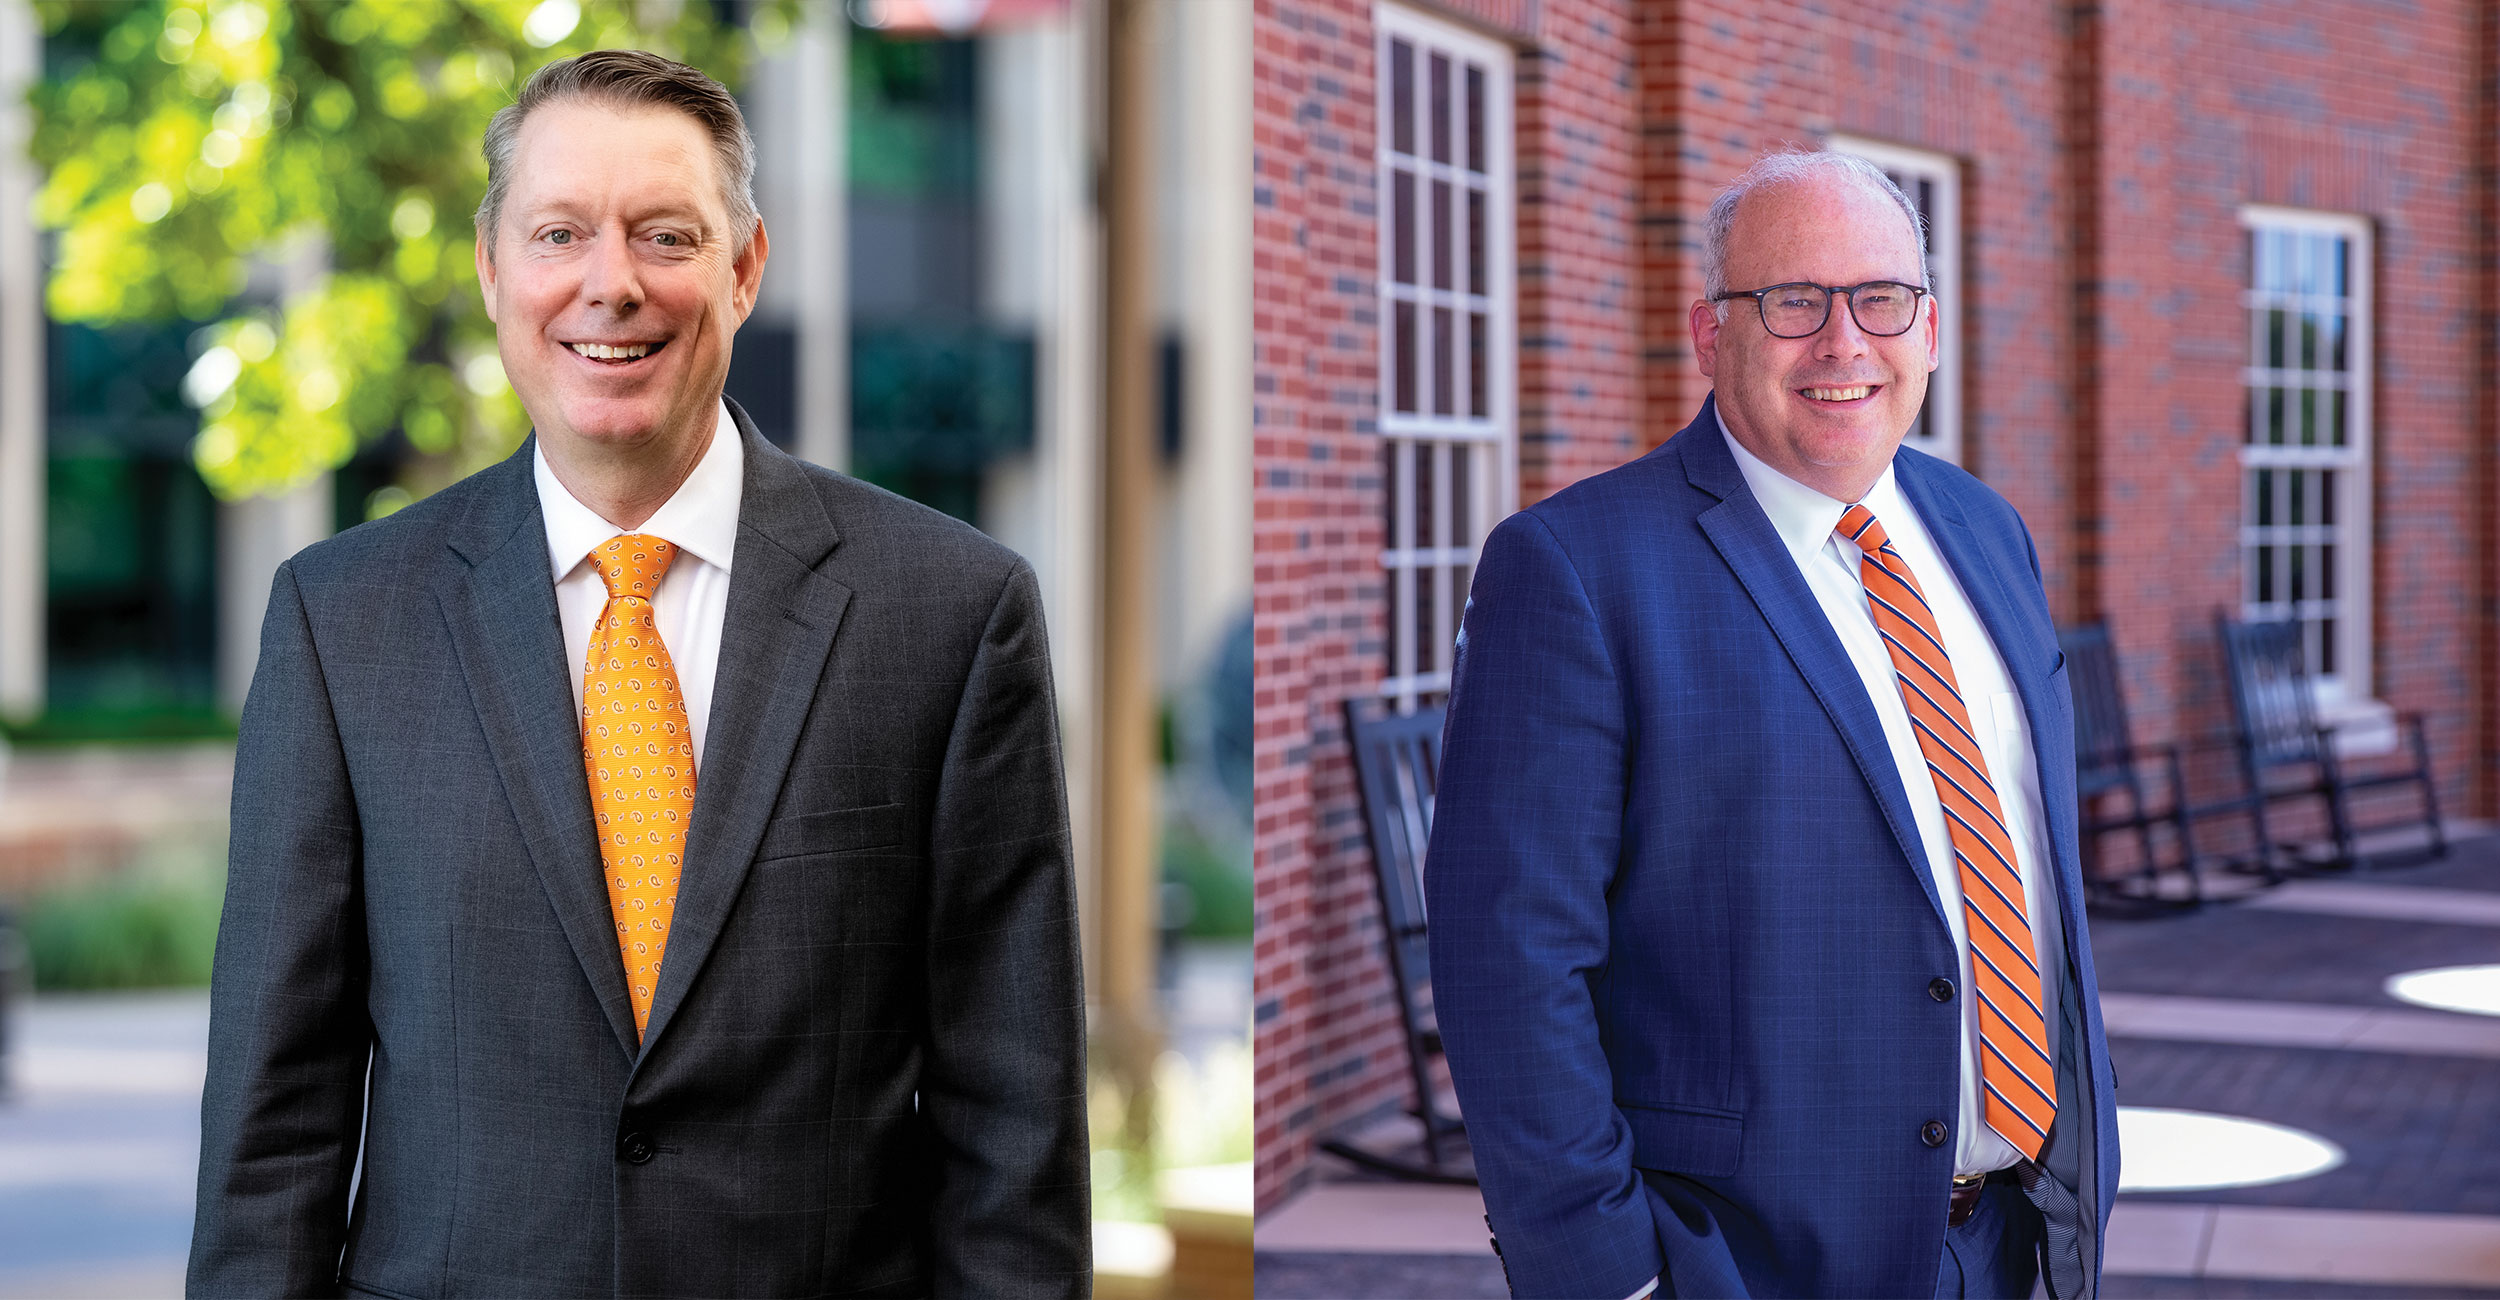 New deans for OSU Agriculture, Business speak on their vision for the future